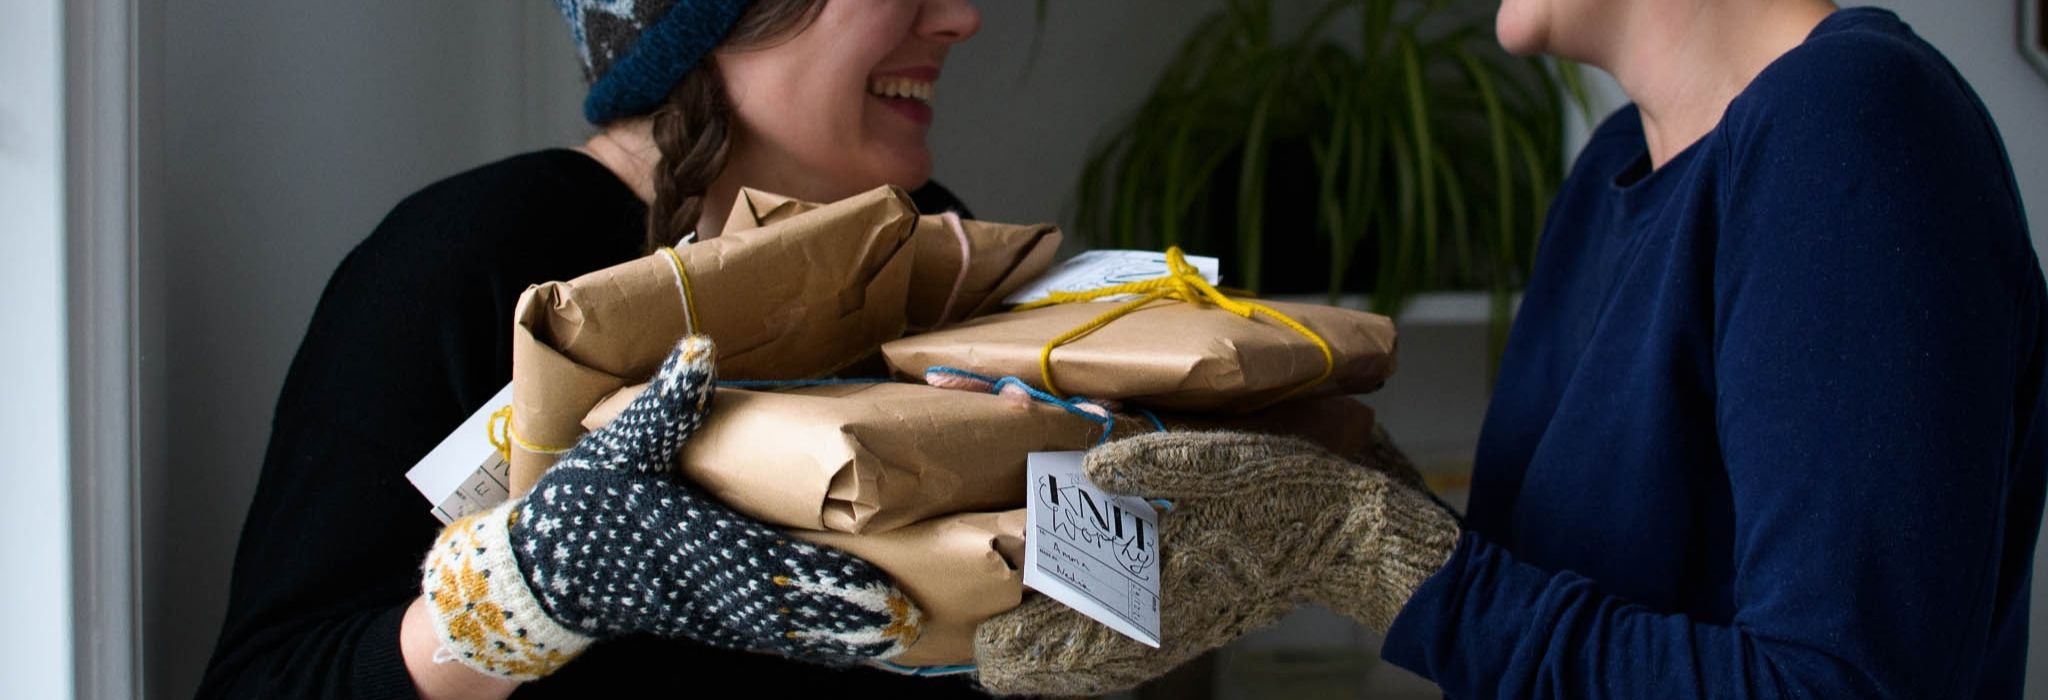 banner photo of two white people laughing and wearing mittens while holding a pile of wrapped gifts